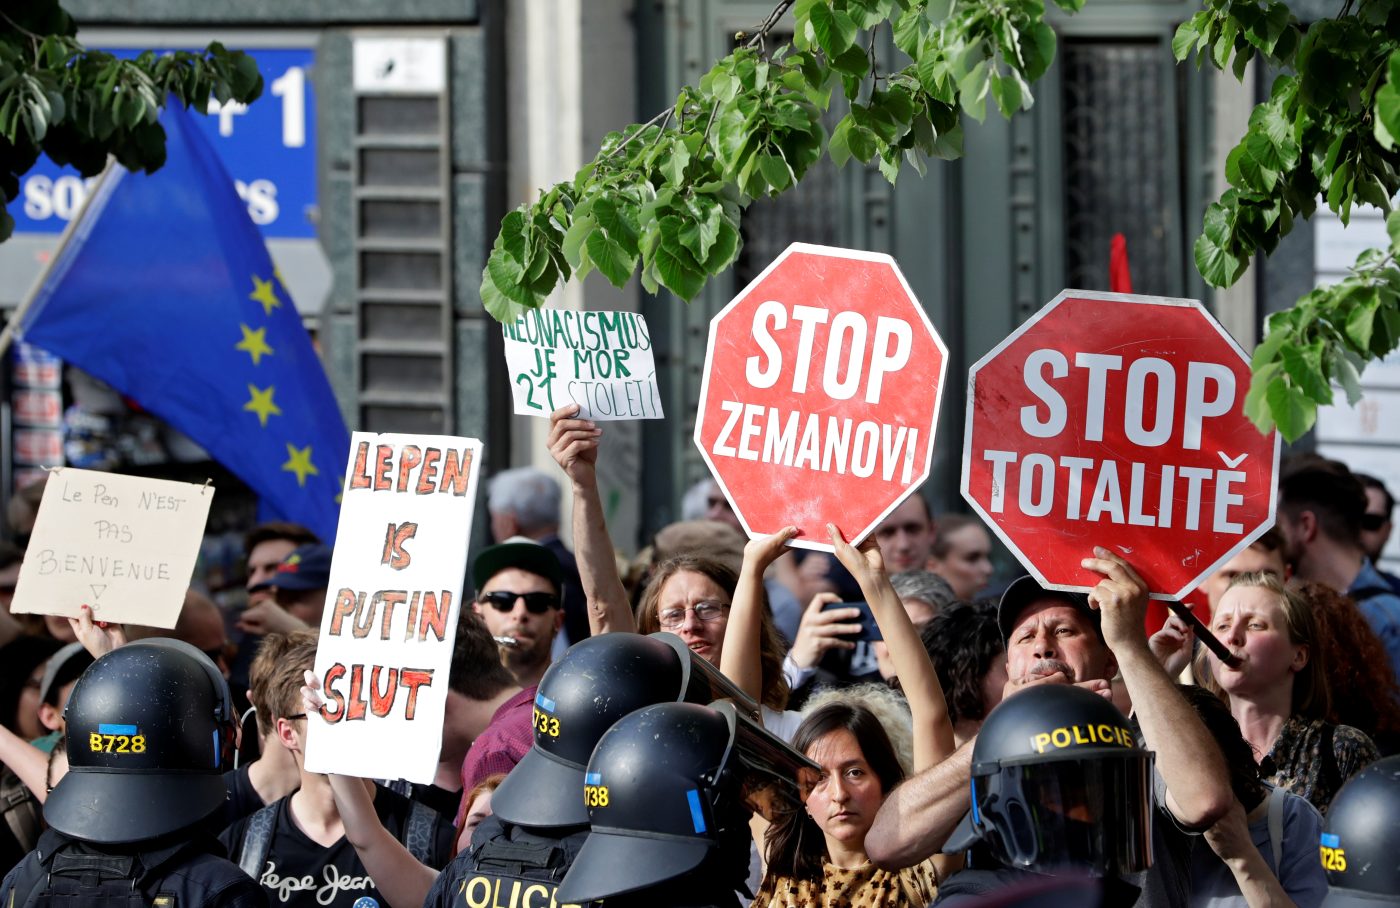 Photo: People protest during a European far-right leaders meeting at Wenceslas Square in Prague, Czech Republic April 25, 2019. The signs read: "Stop Zeman. Stop totality." Credit: REUTERS/David W Cerny